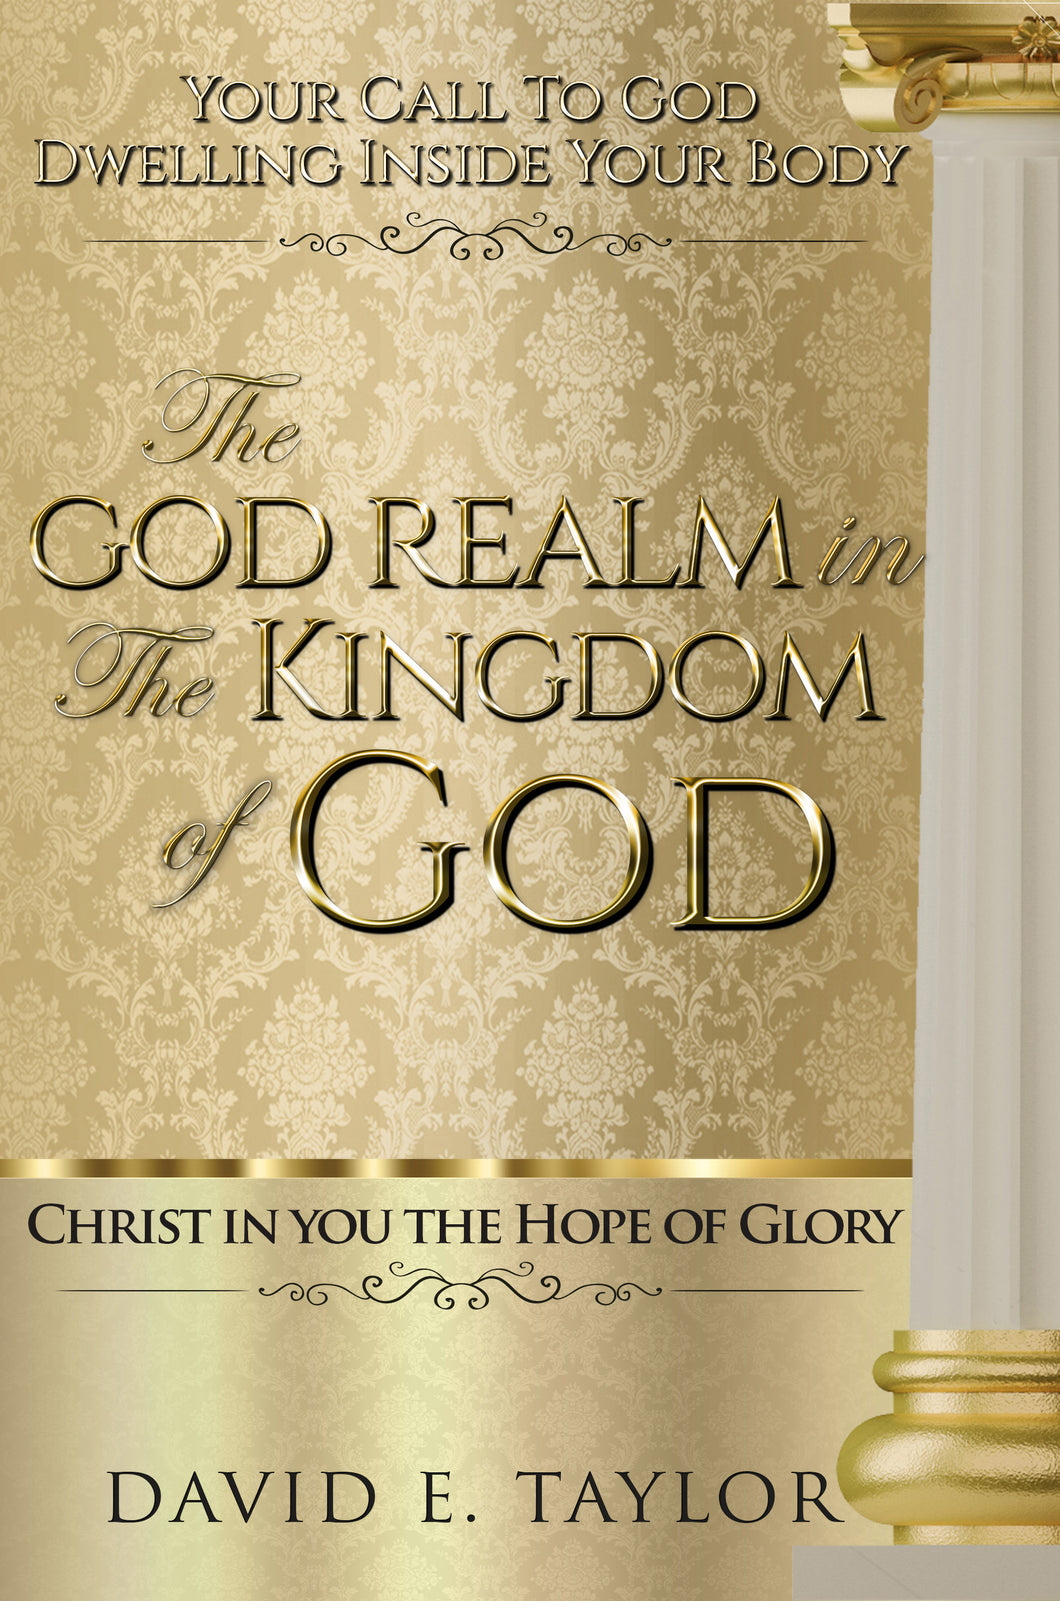 The God Realm in the Kingdom of God: Your Call to God Dwelling Inside Your Body E-Book